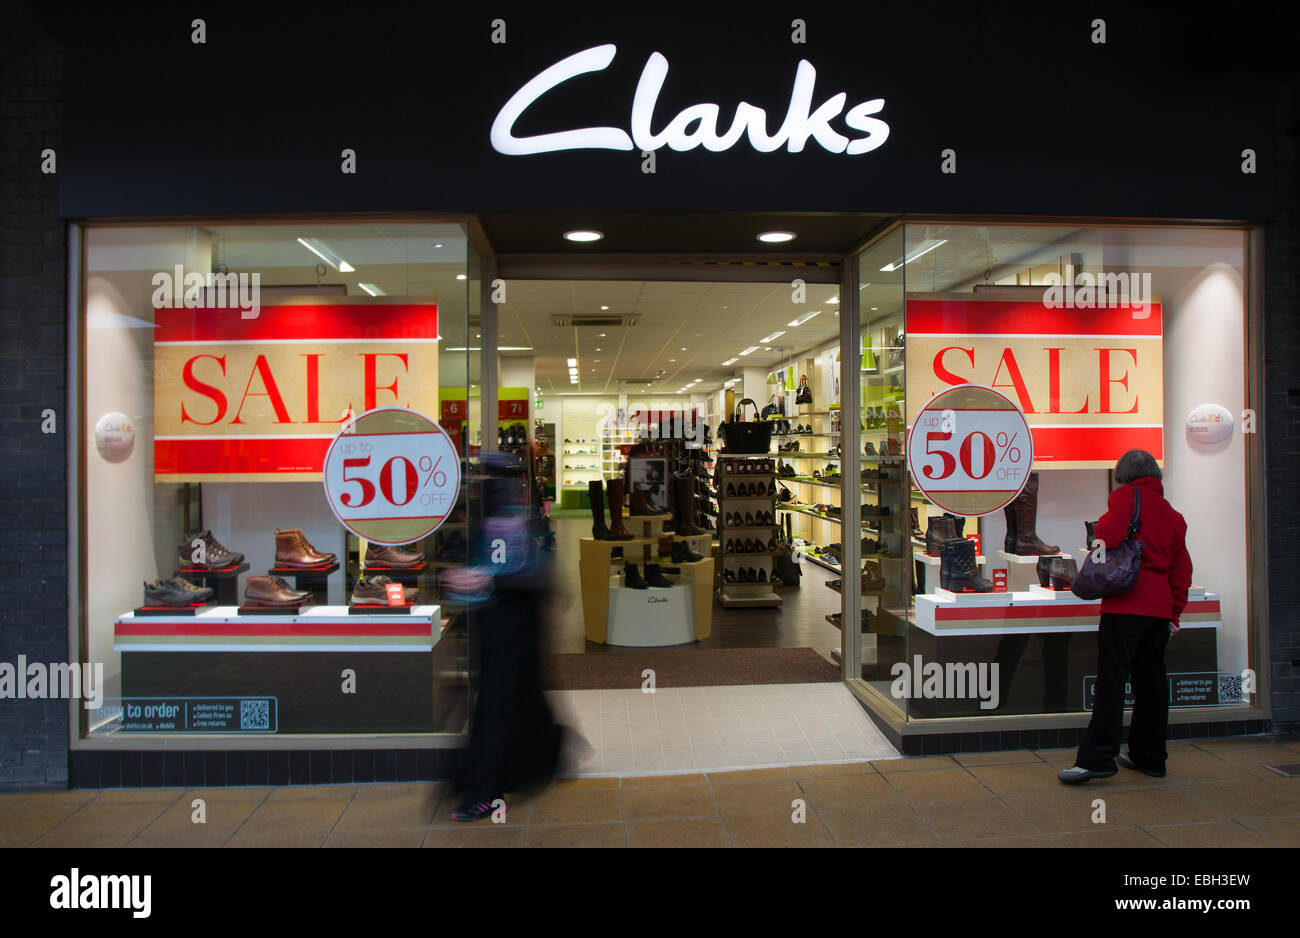 clarks shoe store locations